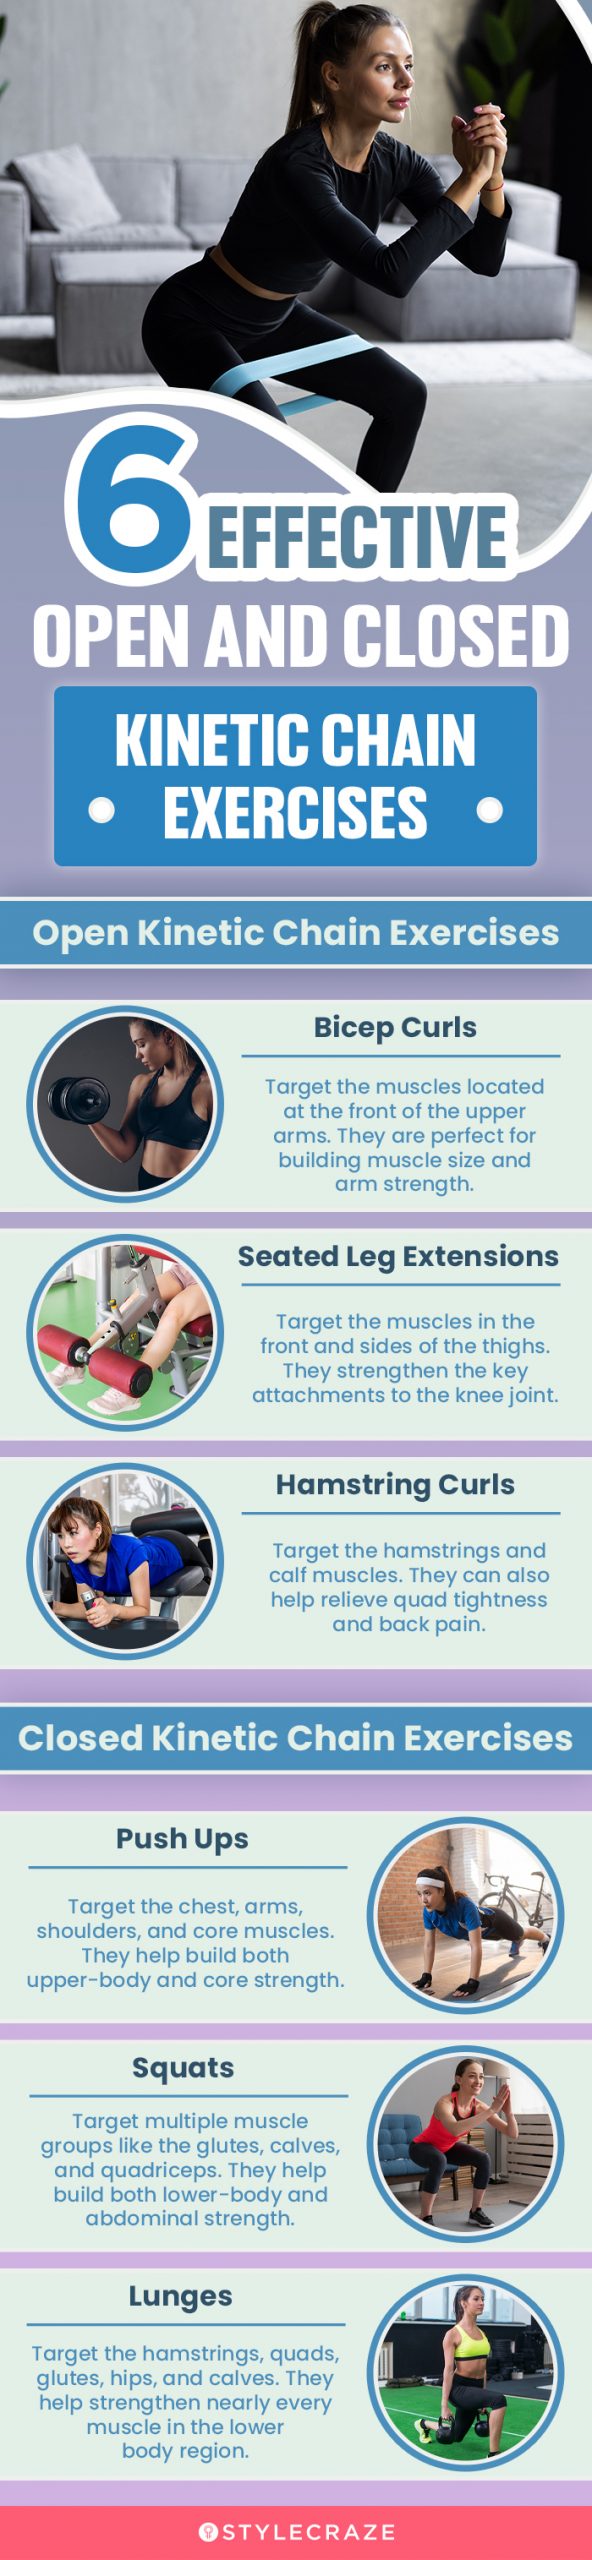 6 effective open and closed kinetic chain exercises (infographic)